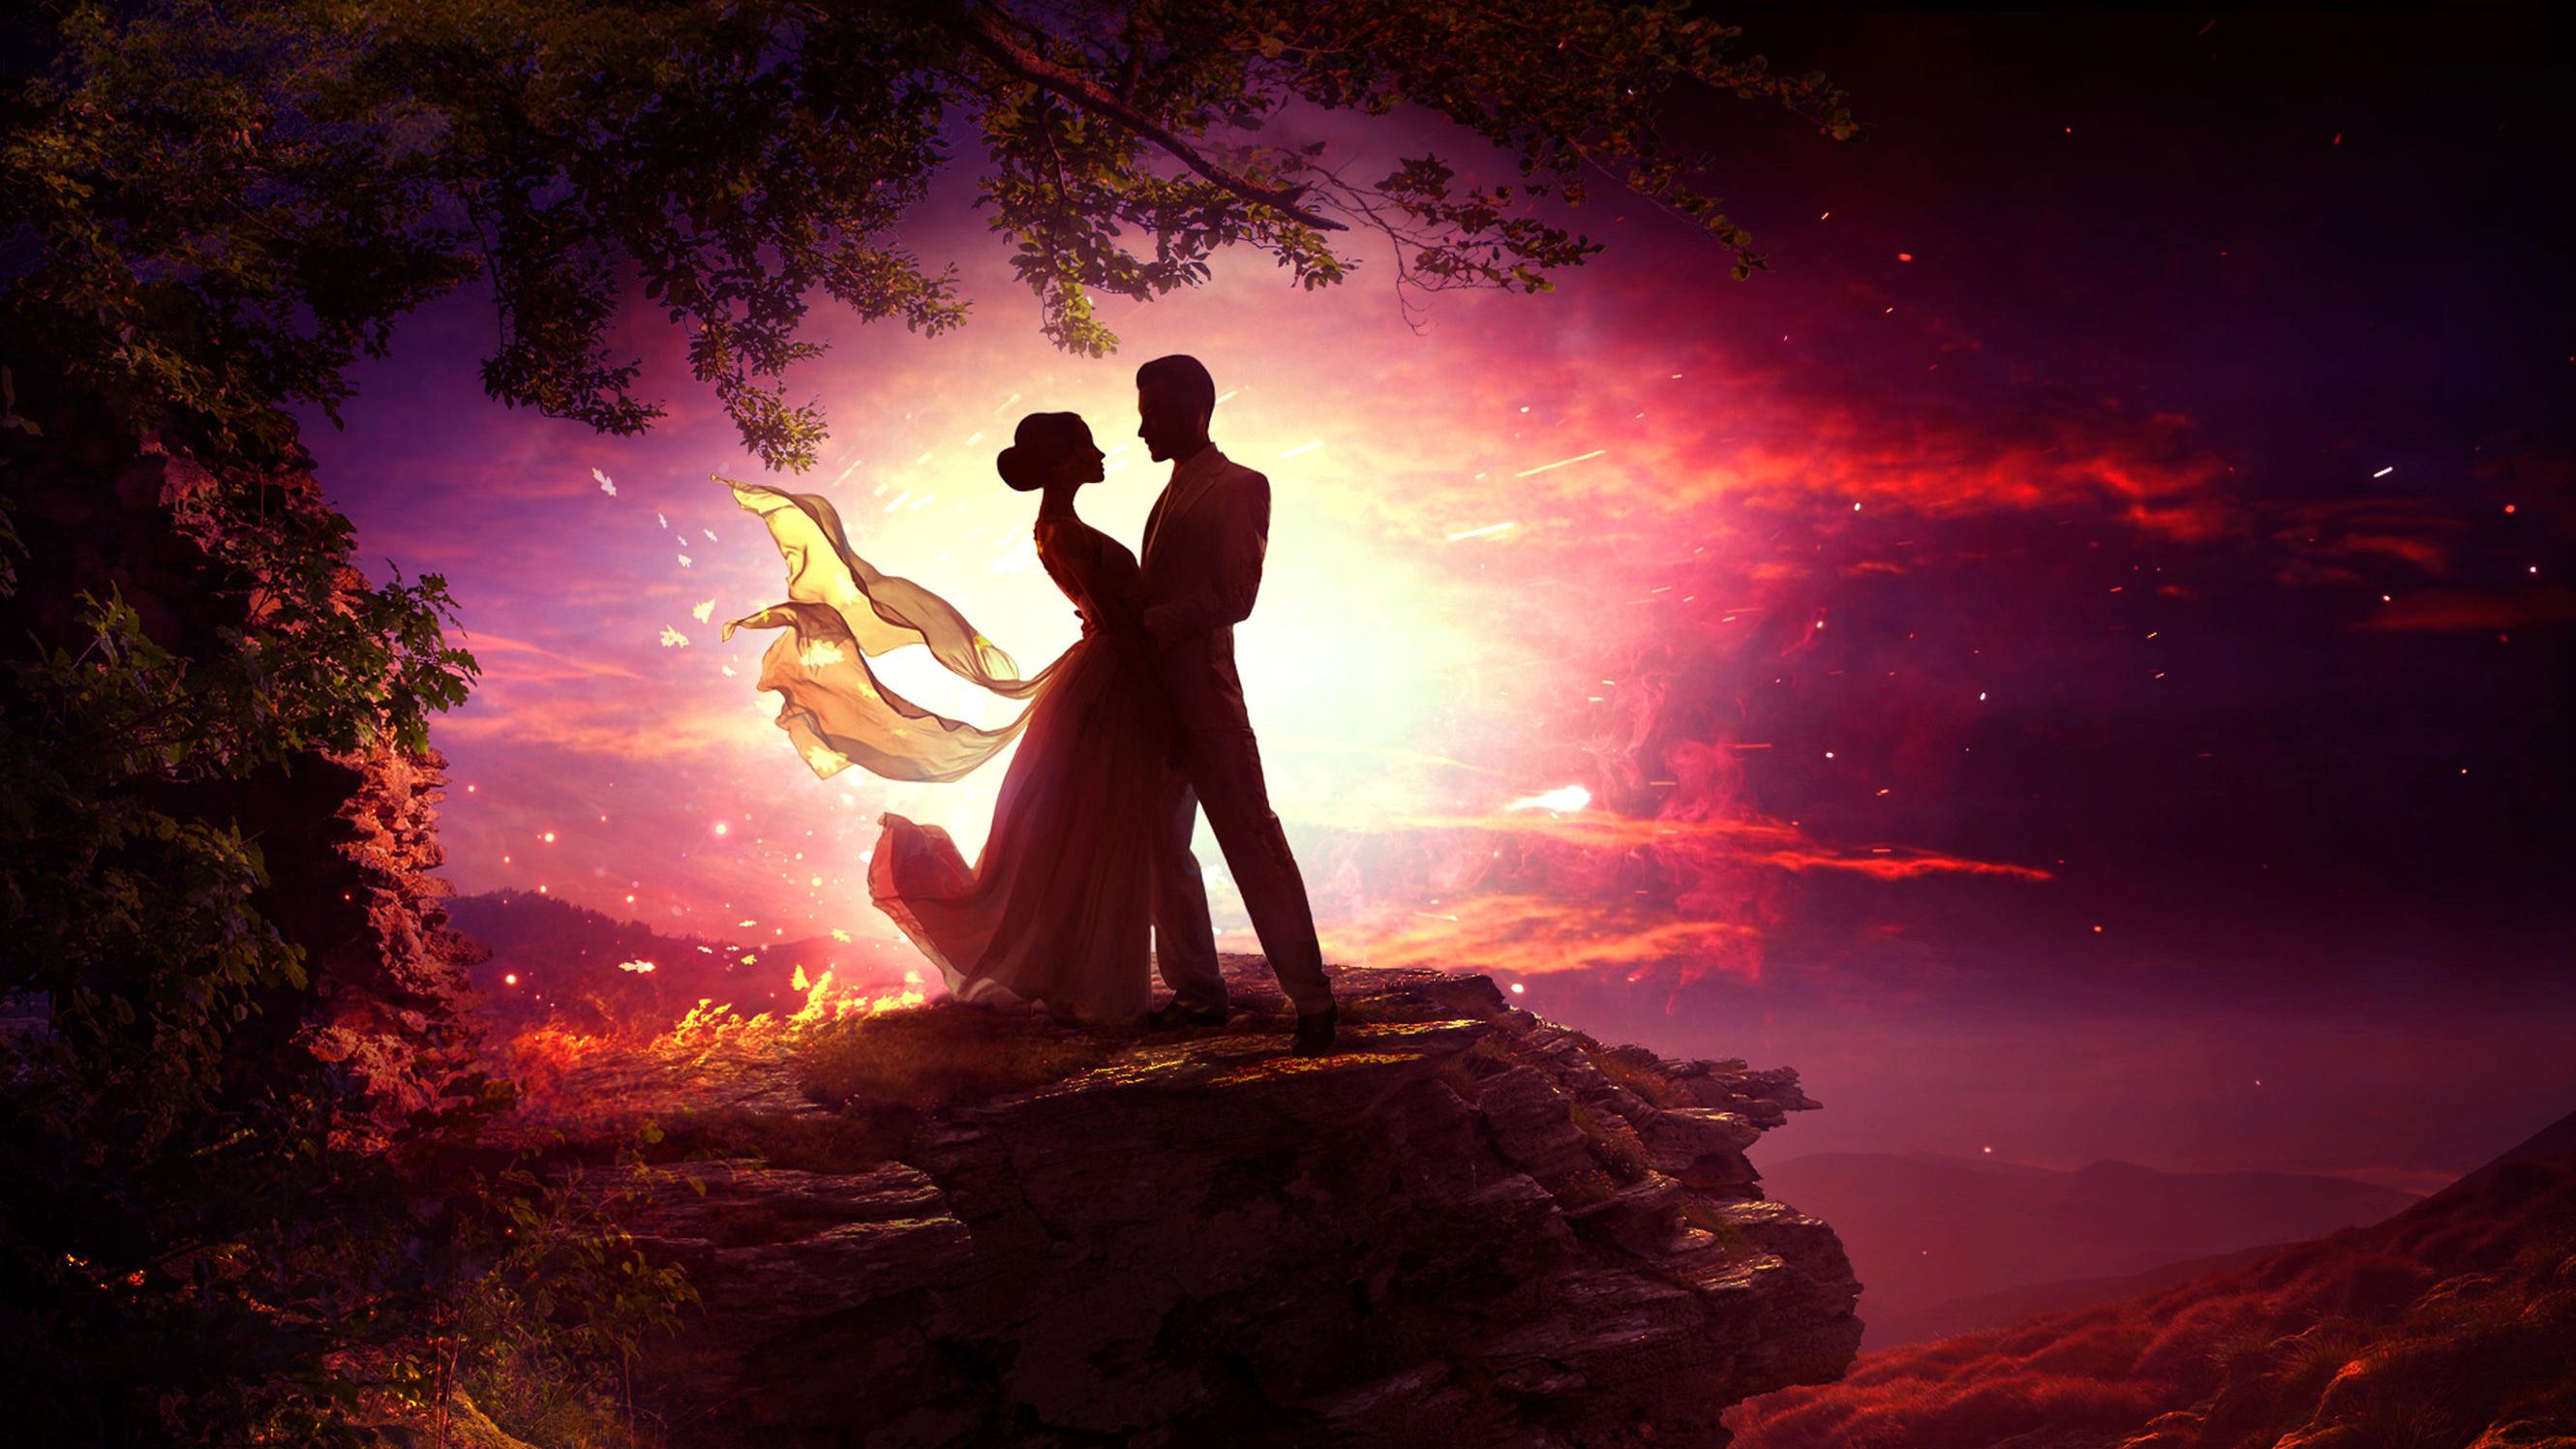 Dancing Couple In Moonlight 2048x1152 Resolution HD 4k Wallpaper, Image, Background, Photo and Picture